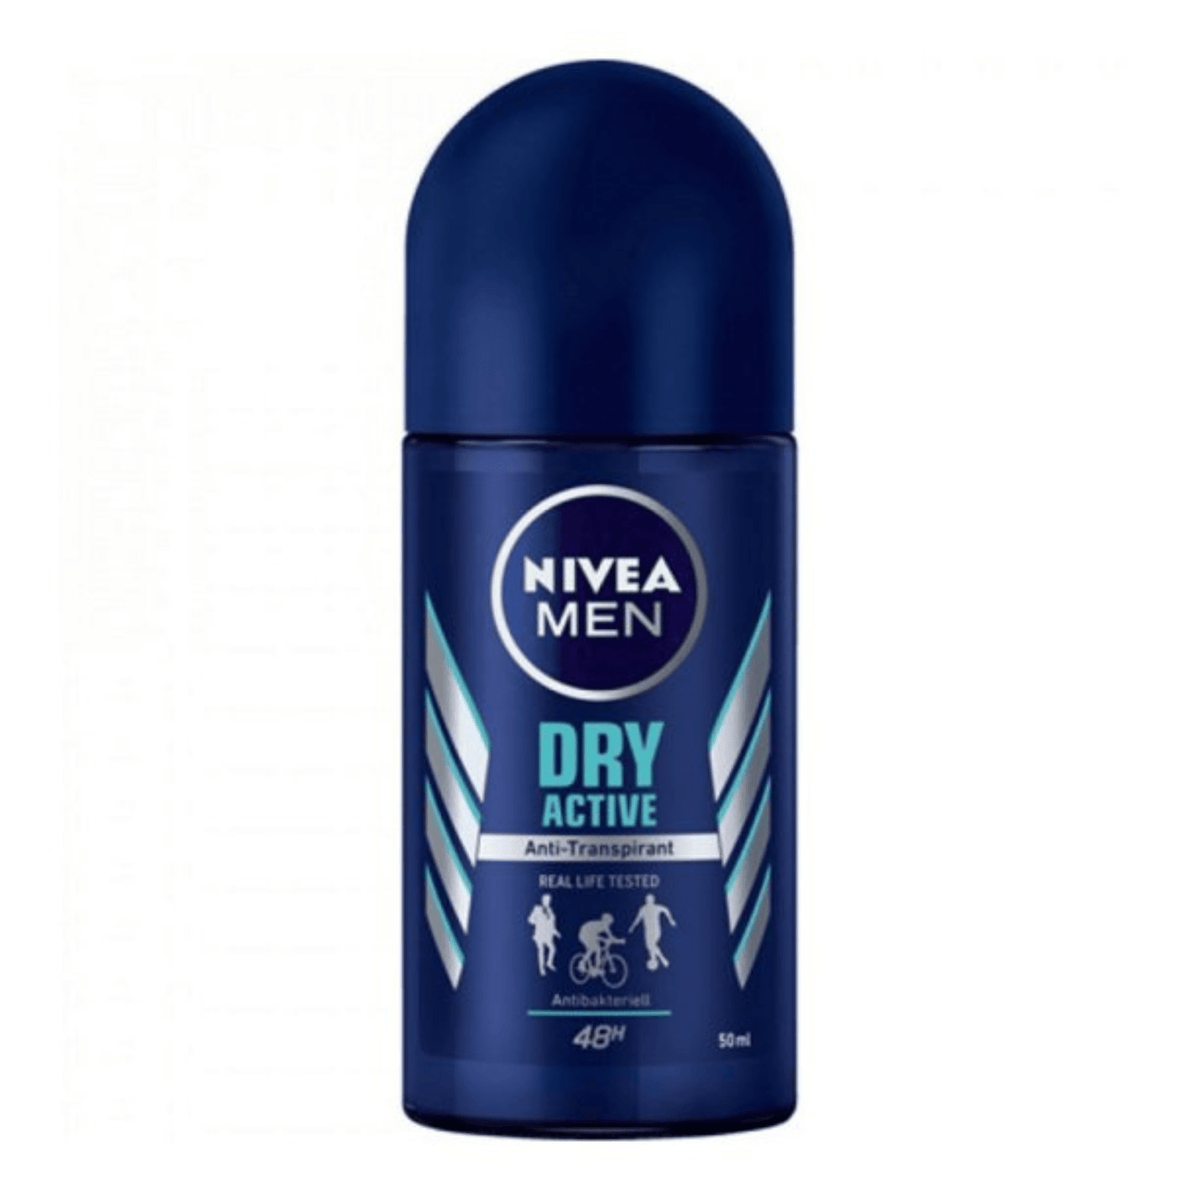 Primary Image of Men Dry Active Roll-On